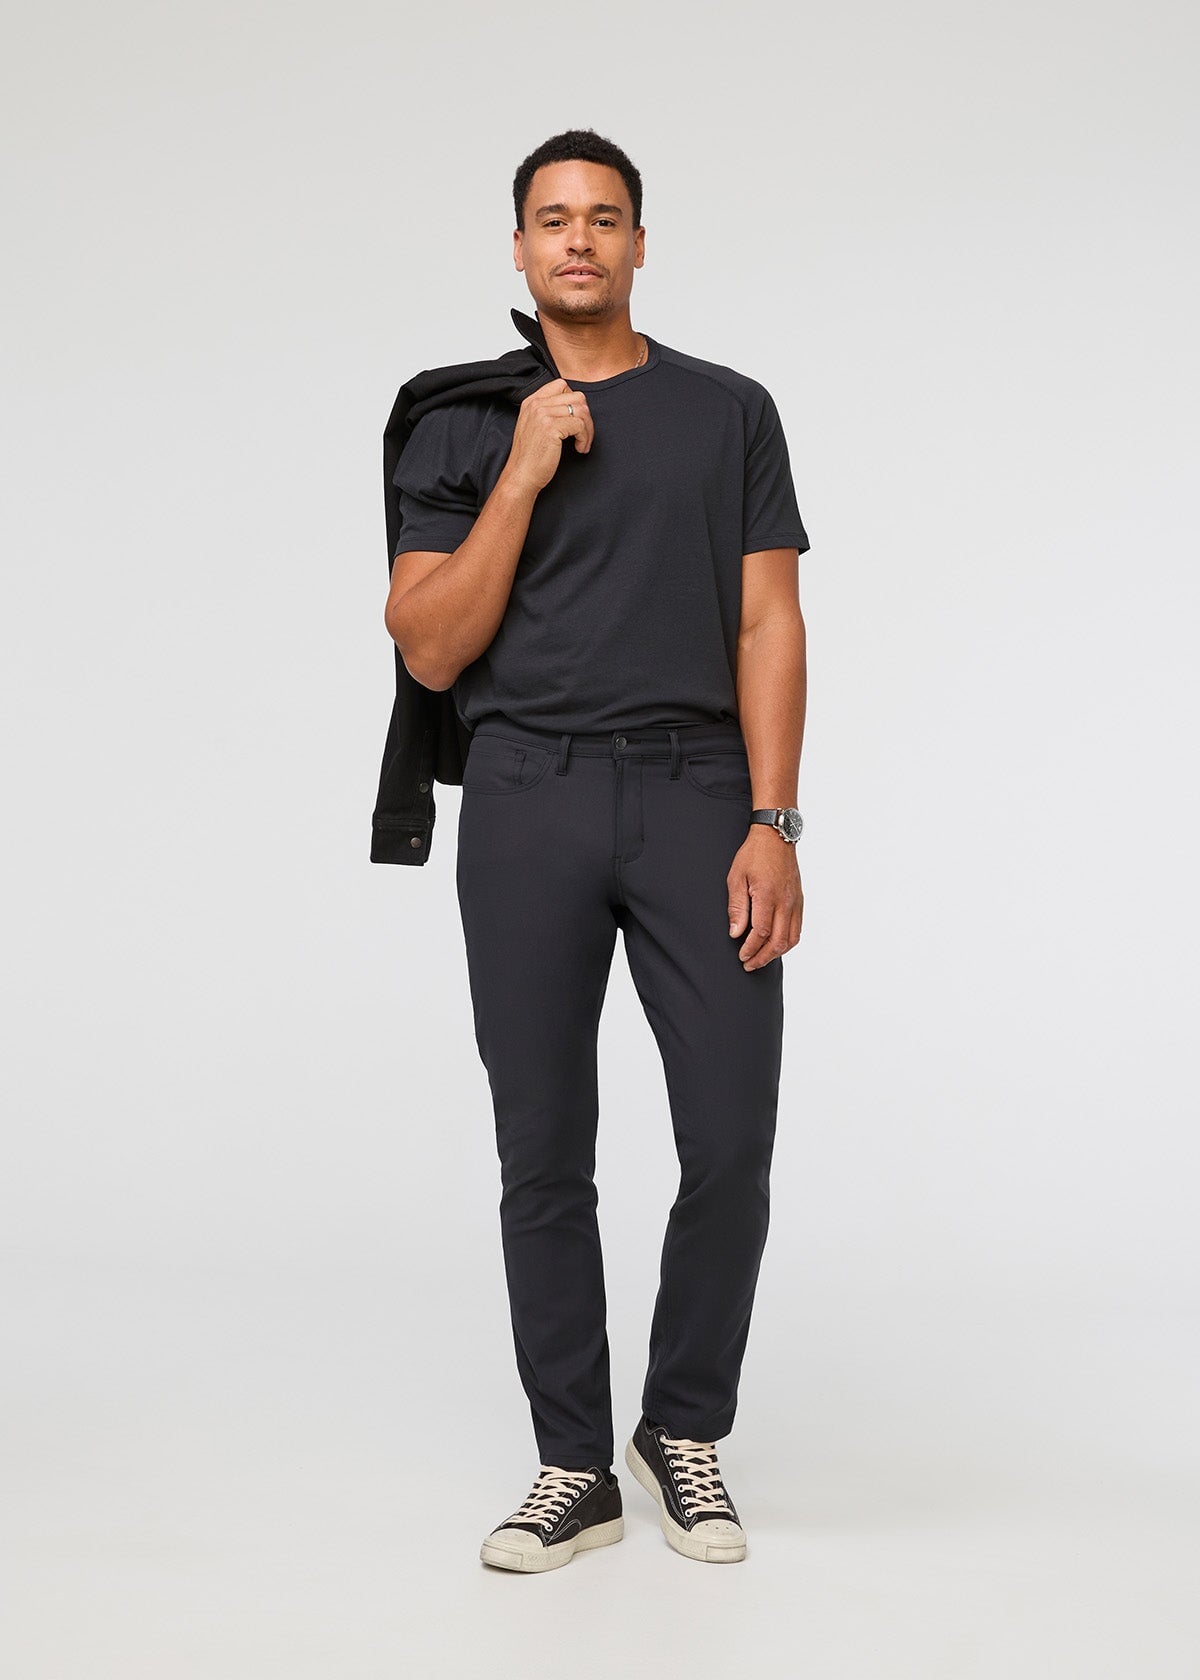 mens black relaxed fit stretch pant full body